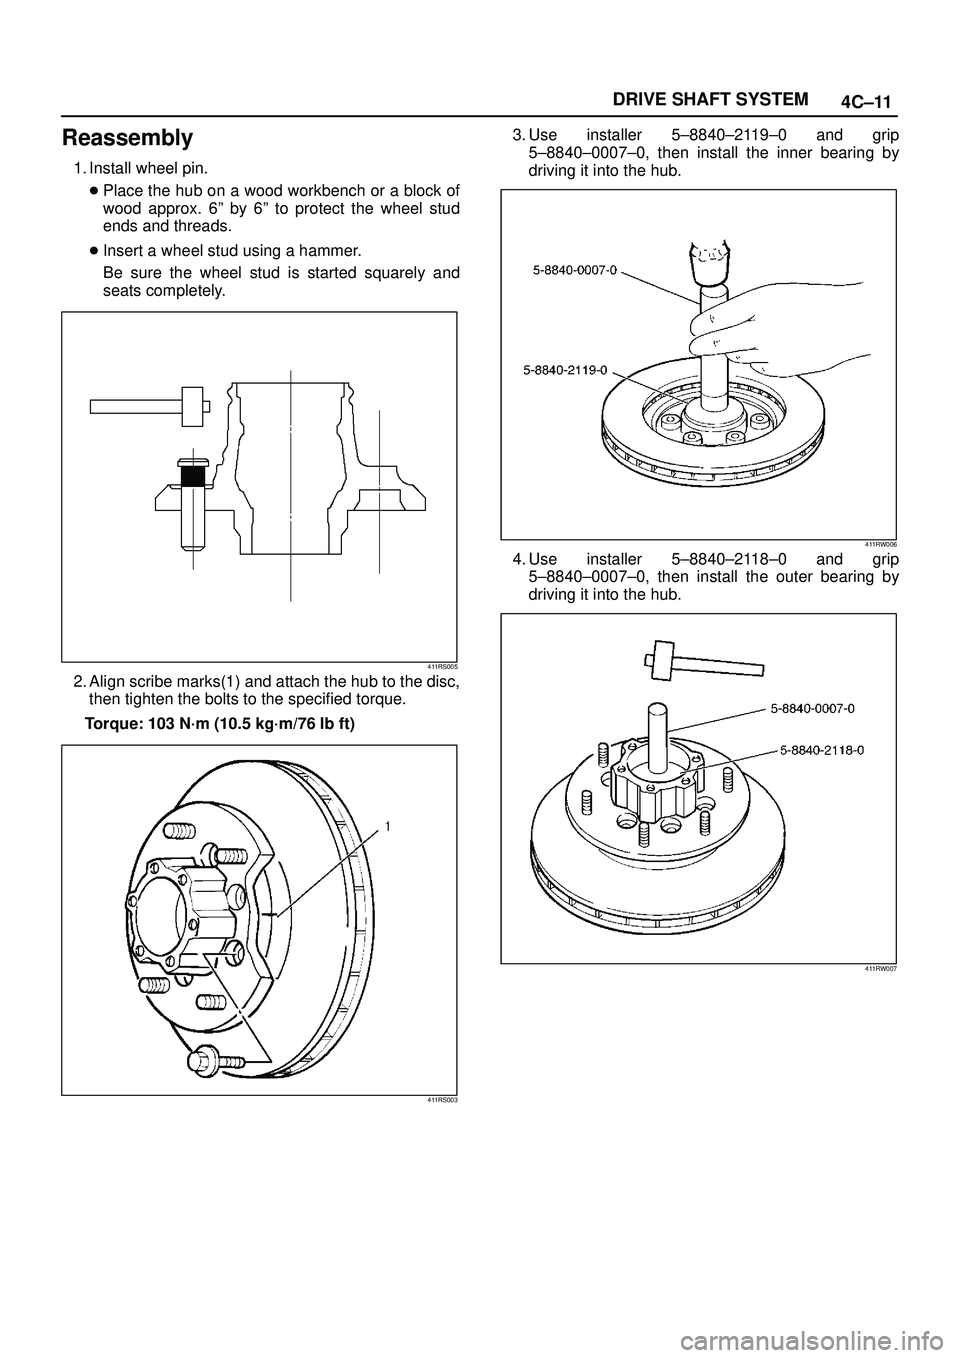 ISUZU TROOPER 1998  Service Owners Manual 4C±11 DRIVE SHAFT SYSTEM
Reassembly
1. Install wheel pin.
Place the hub on a wood workbench or a block of
wood approx. 6º by 6º to protect the wheel stud
ends and threads.
Insert a wheel stud usi